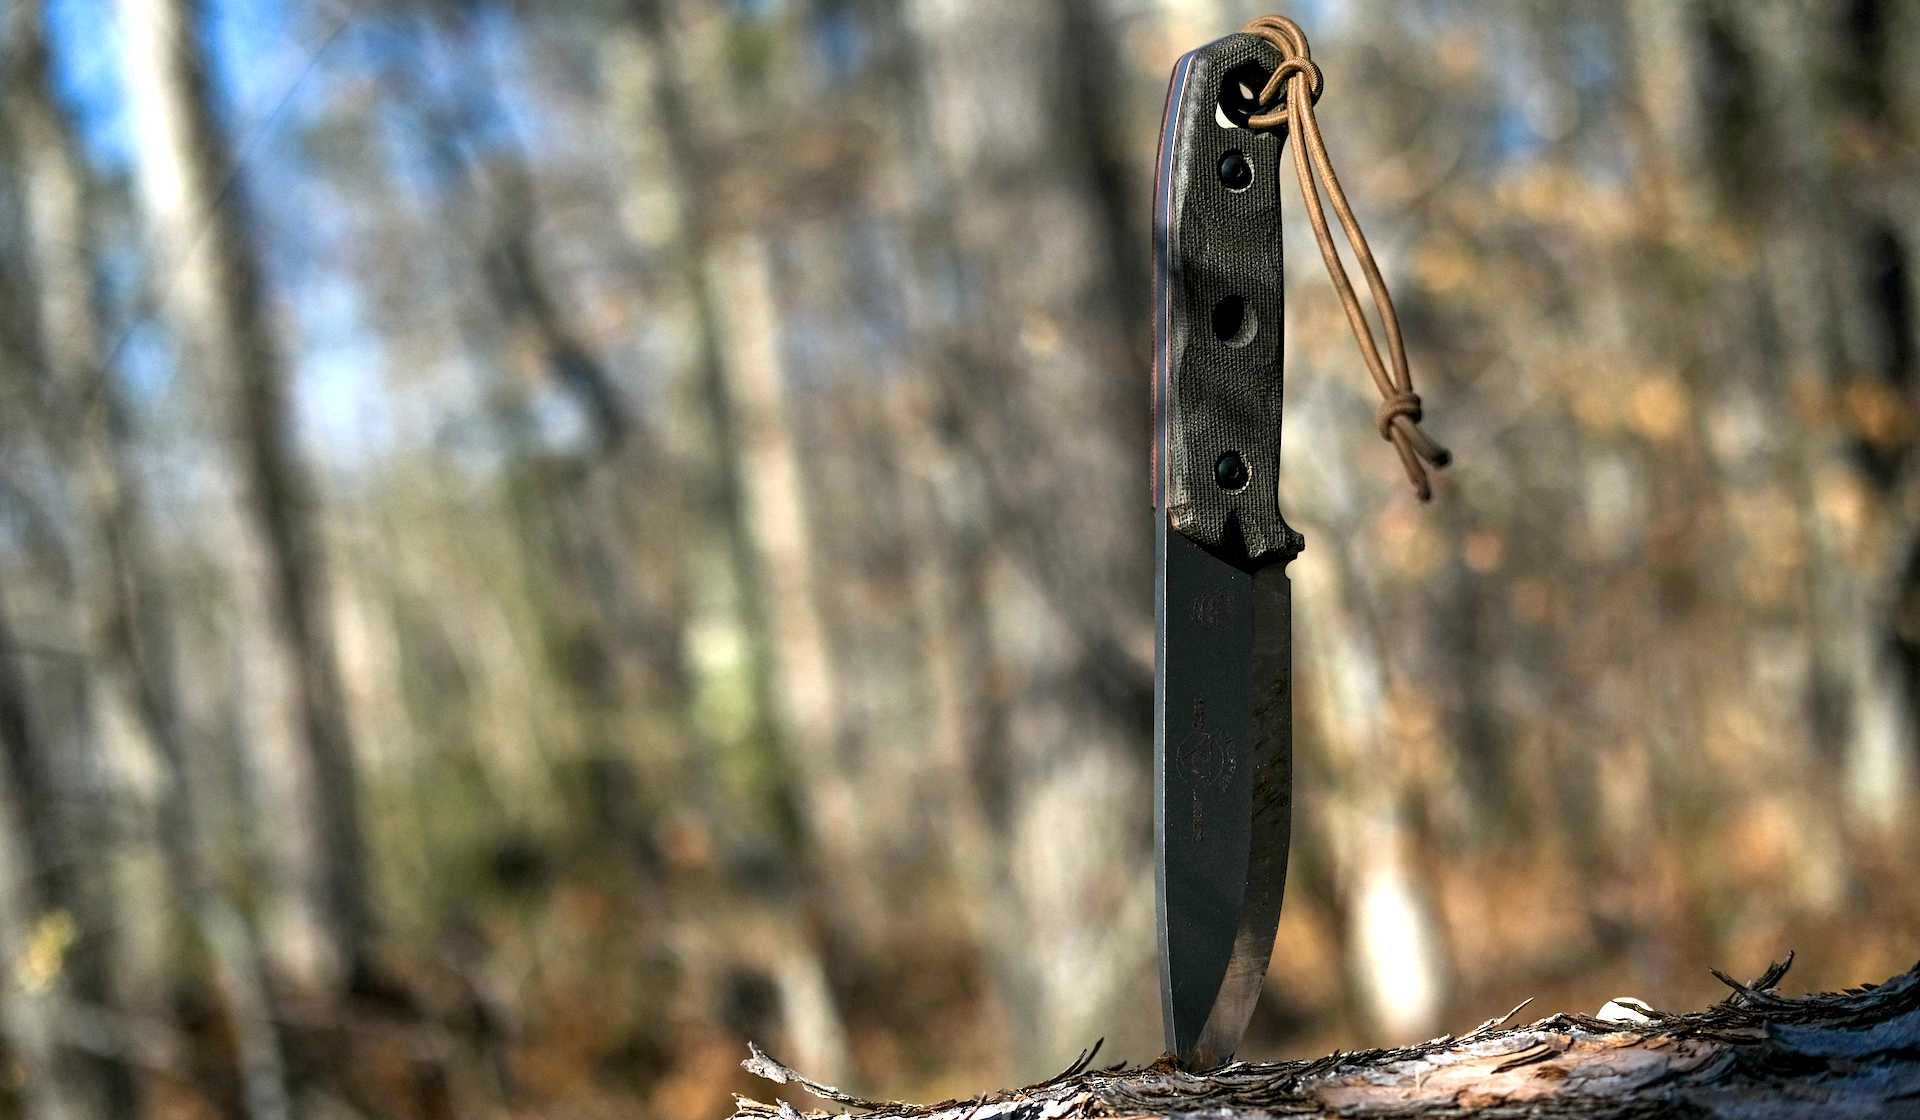 5 Survival And Bushcraft Tool Options For Cutting And Chopping